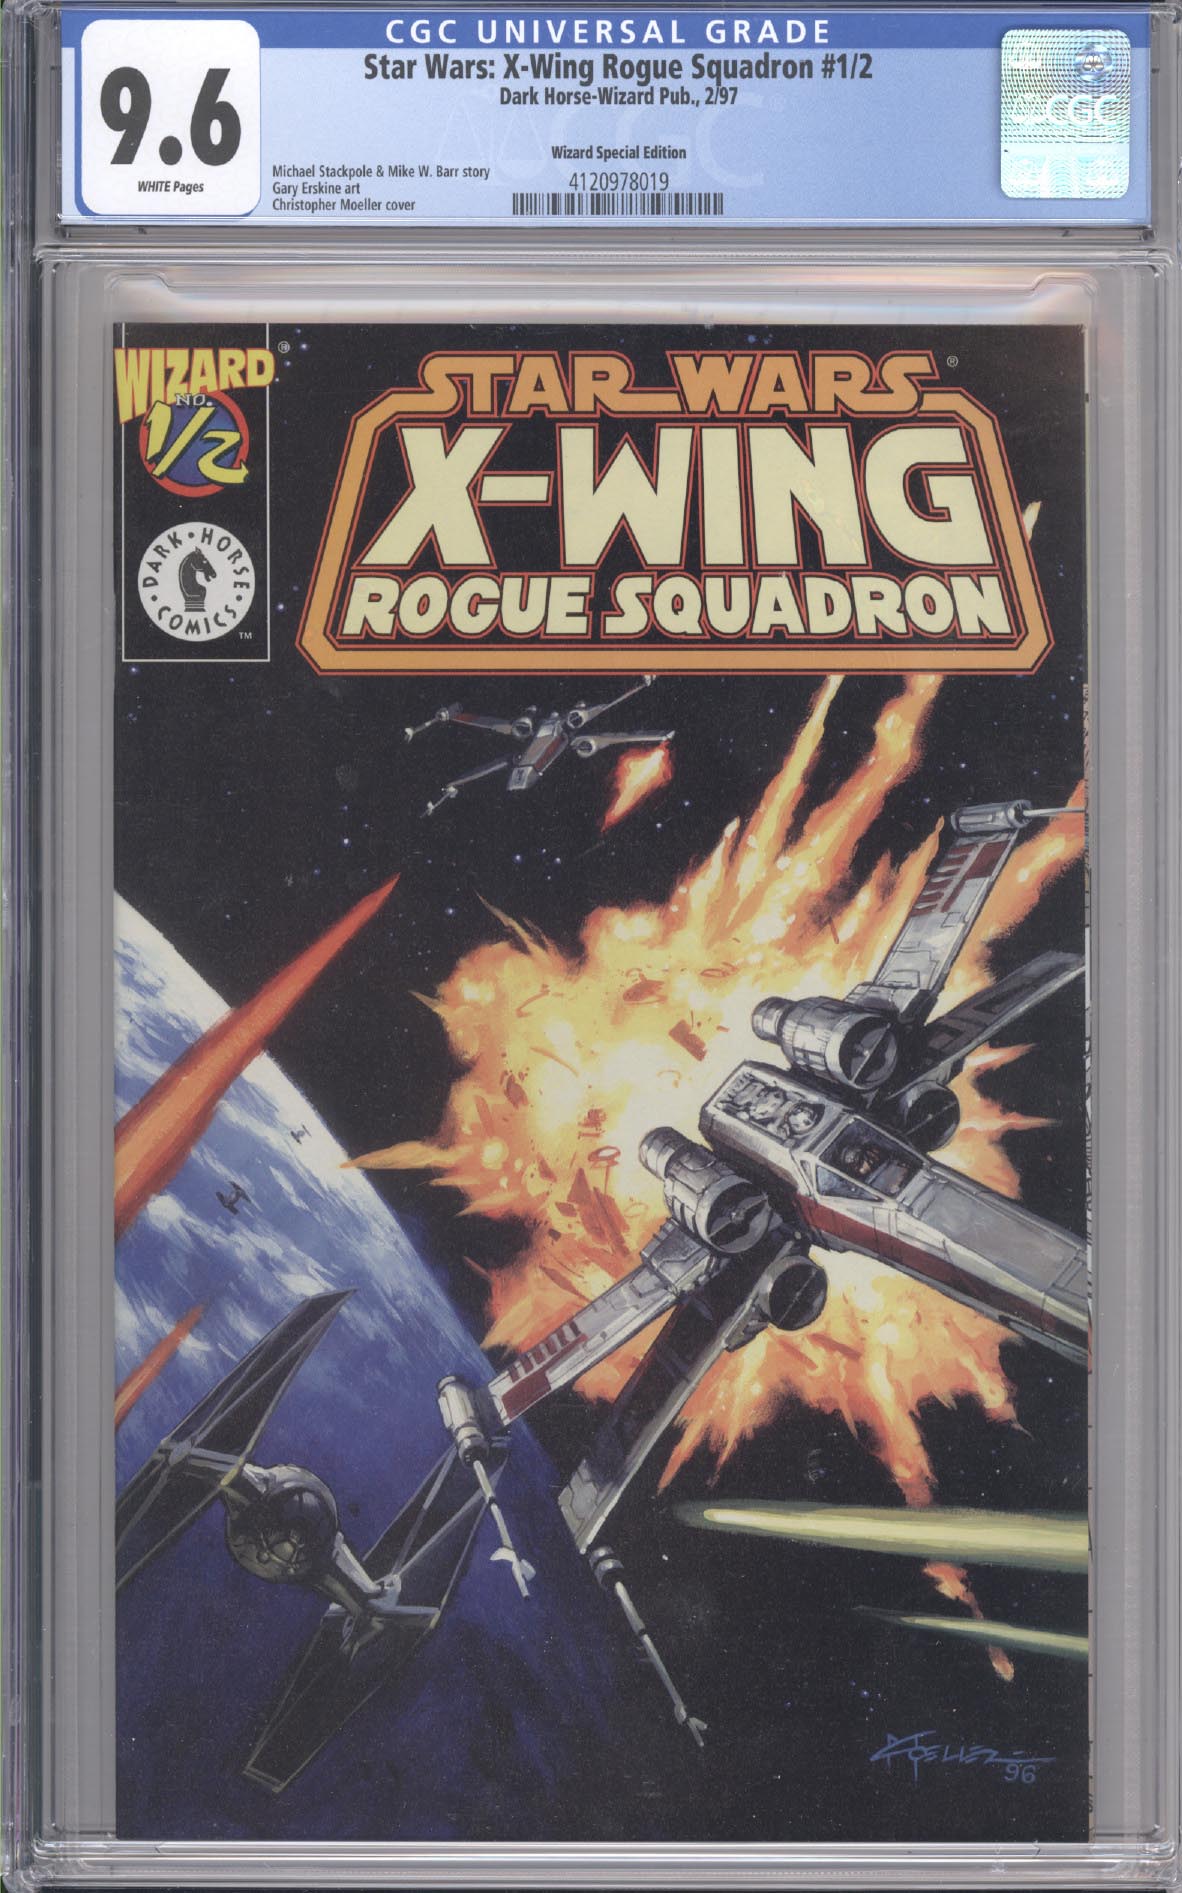 Star Wars X-Wing Rogue Squadron #1/2